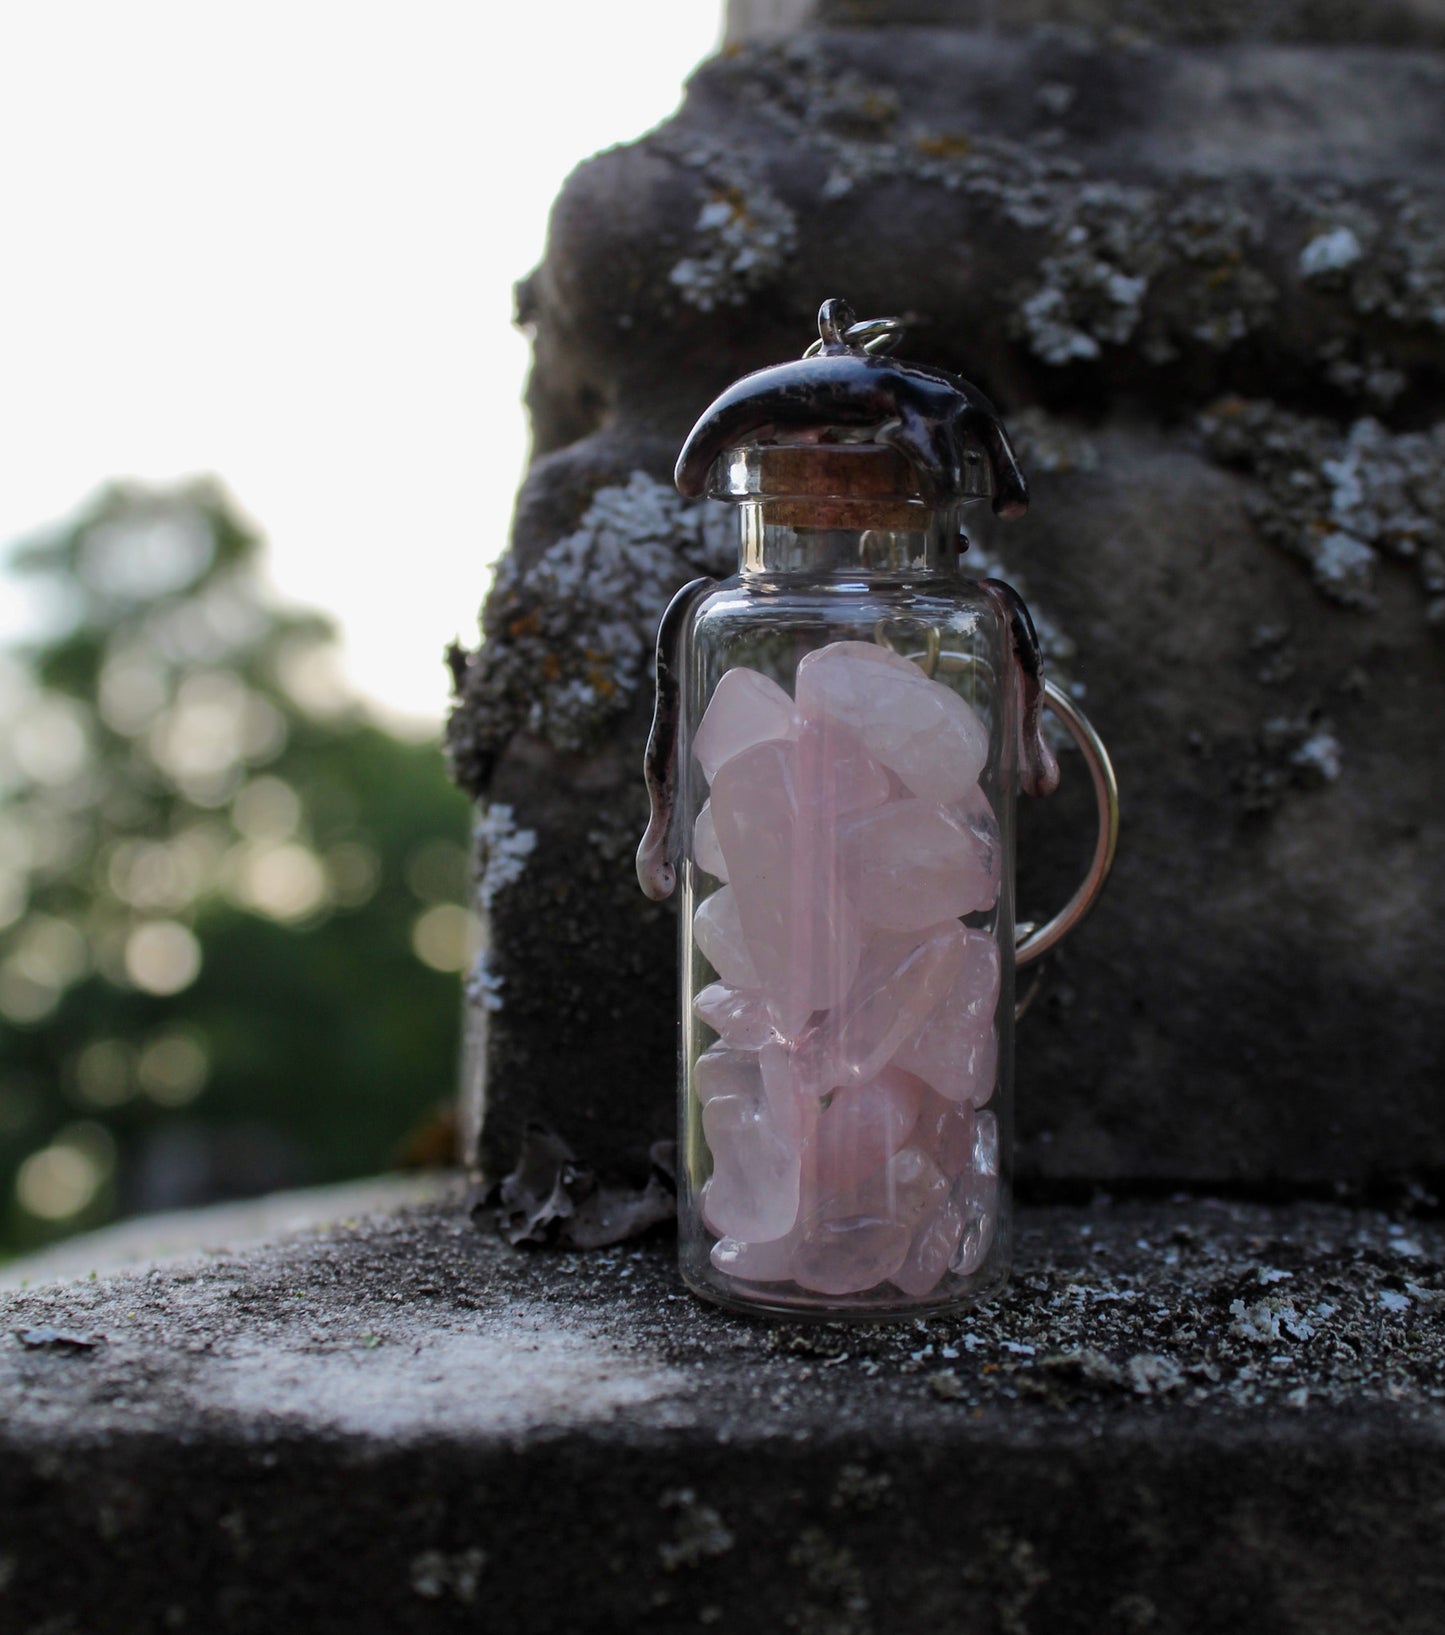 Obsidian, rose quartz, and amethyst crystals inside clear glass jar with wax seals and keychain attachments in front of an old tombstone